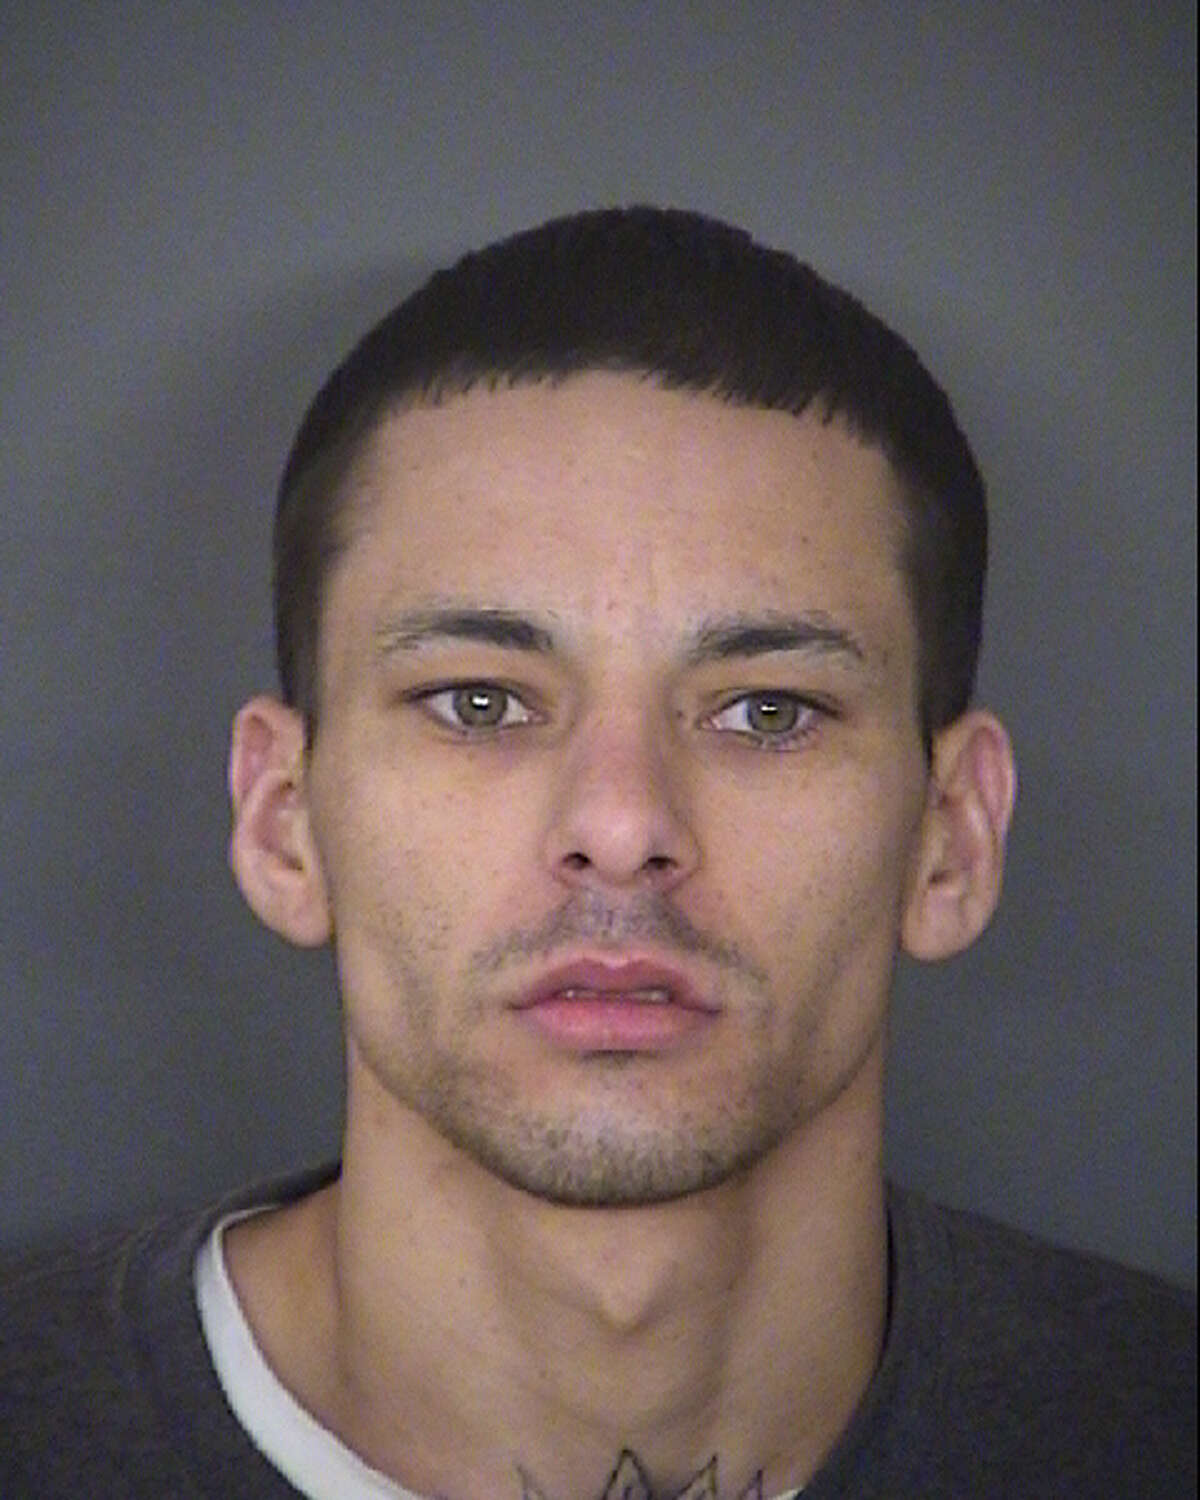 Francisco Moreno faces a charge of aggravated kidnapping, according to the Bexar County Sheriff's Office.